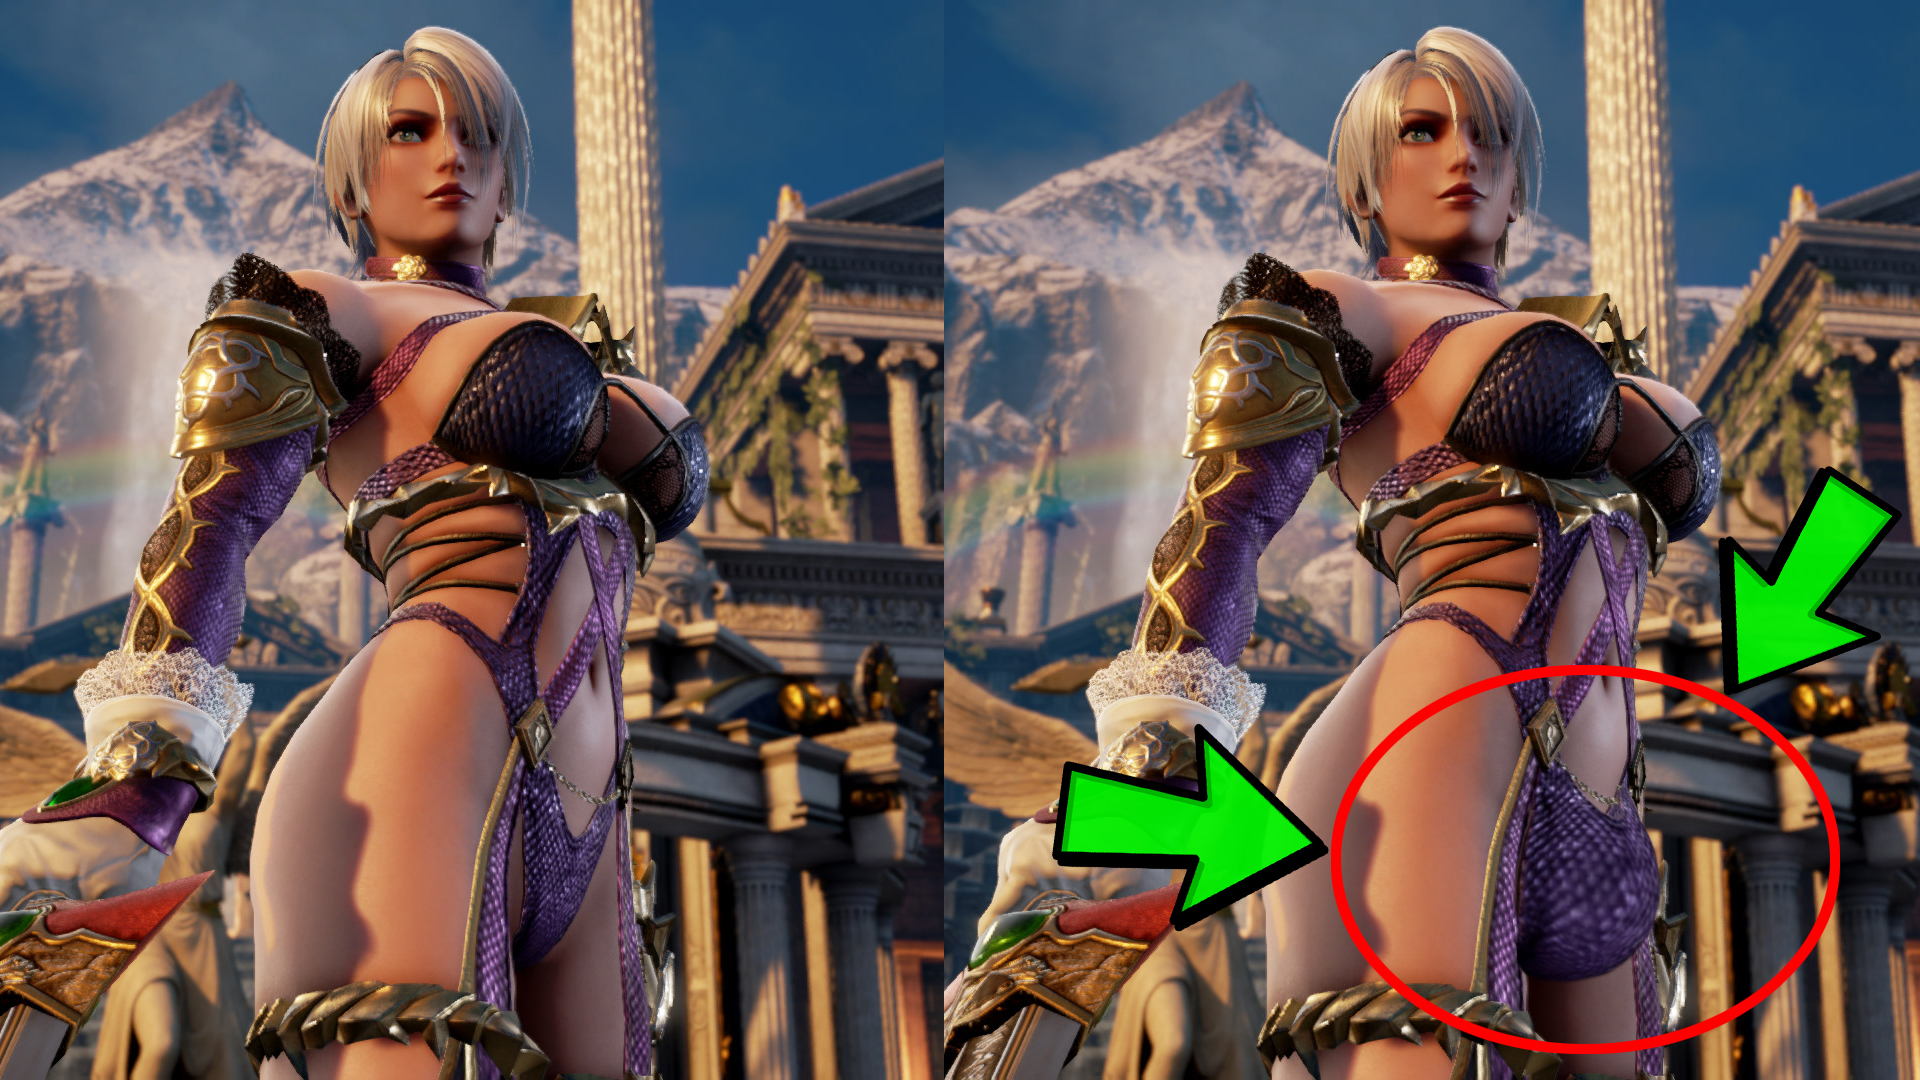 Vuil zegen Onderling verbinden Ivy Is Now A Male" Bandai Namco's Decision After SoulCalibur E3 Backlash  Stirs More Controversy